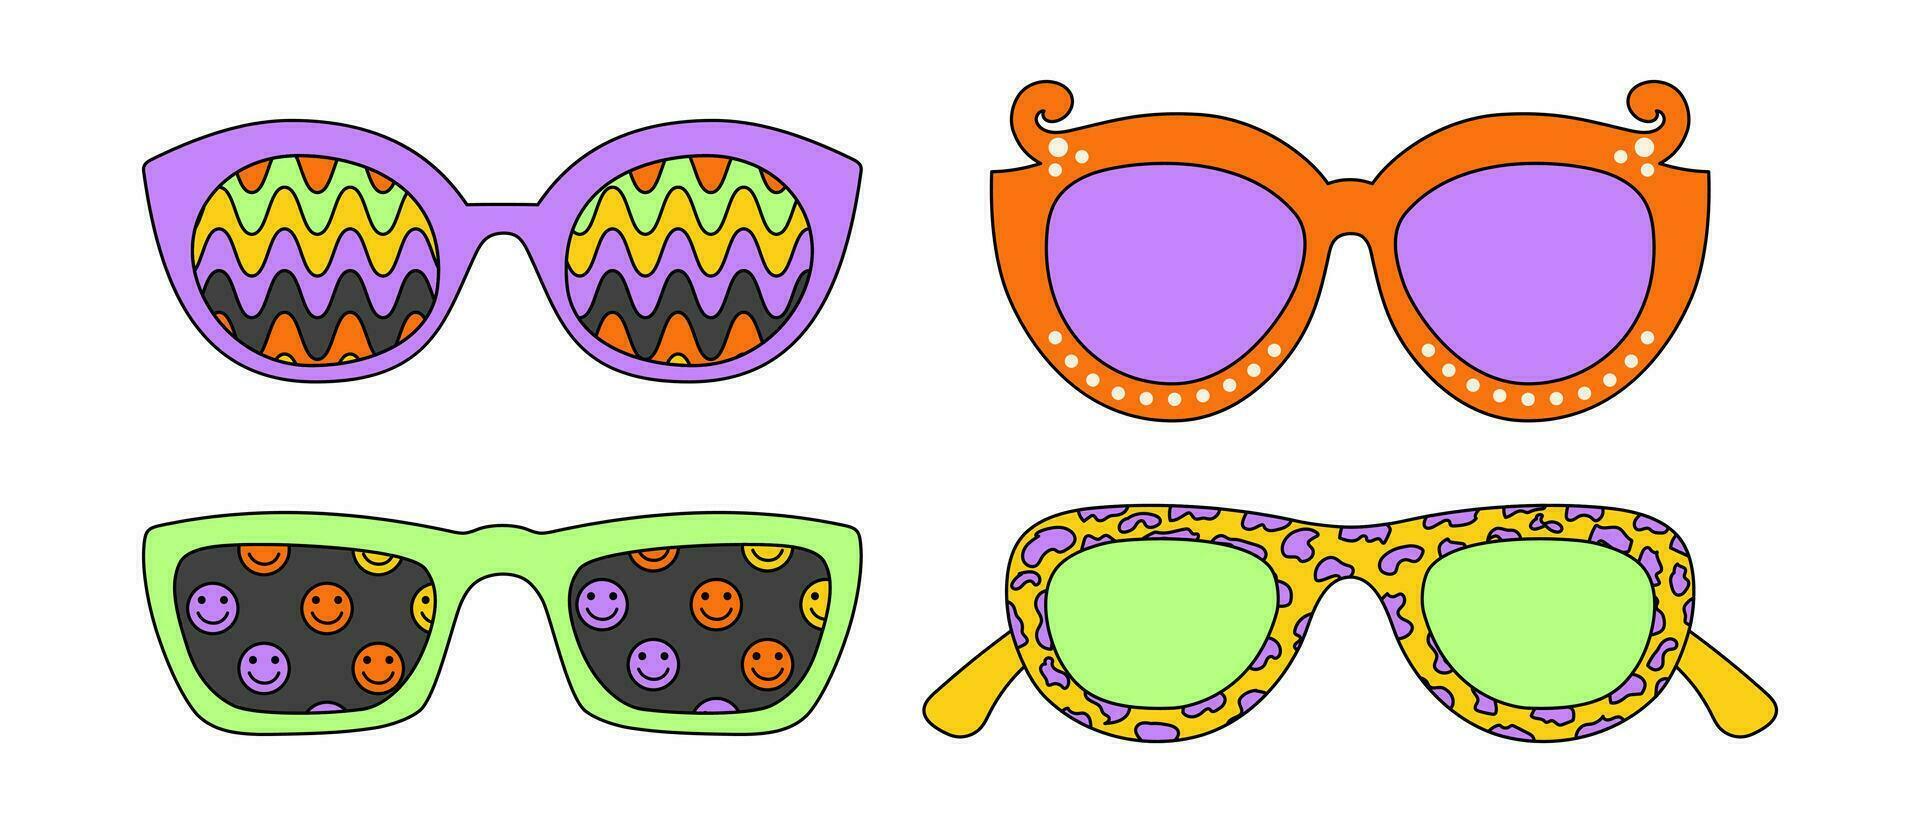 Psychedelic sunglasses with retro patterns. Vintage 70s style. Vector illustration.